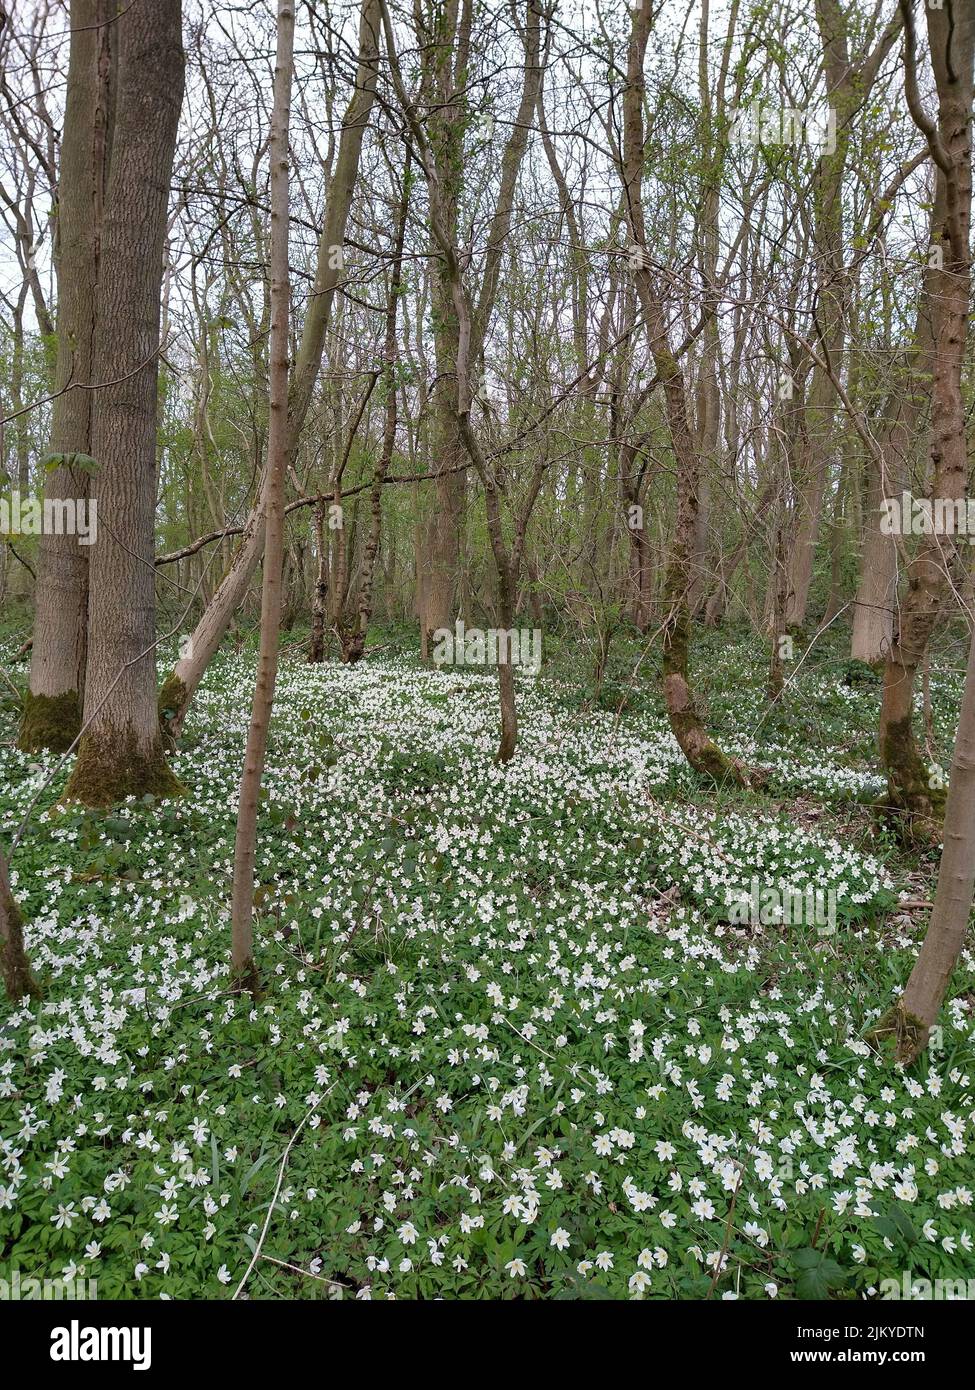 A beautiful landscape of white flowers in a dense forest Stock Photo